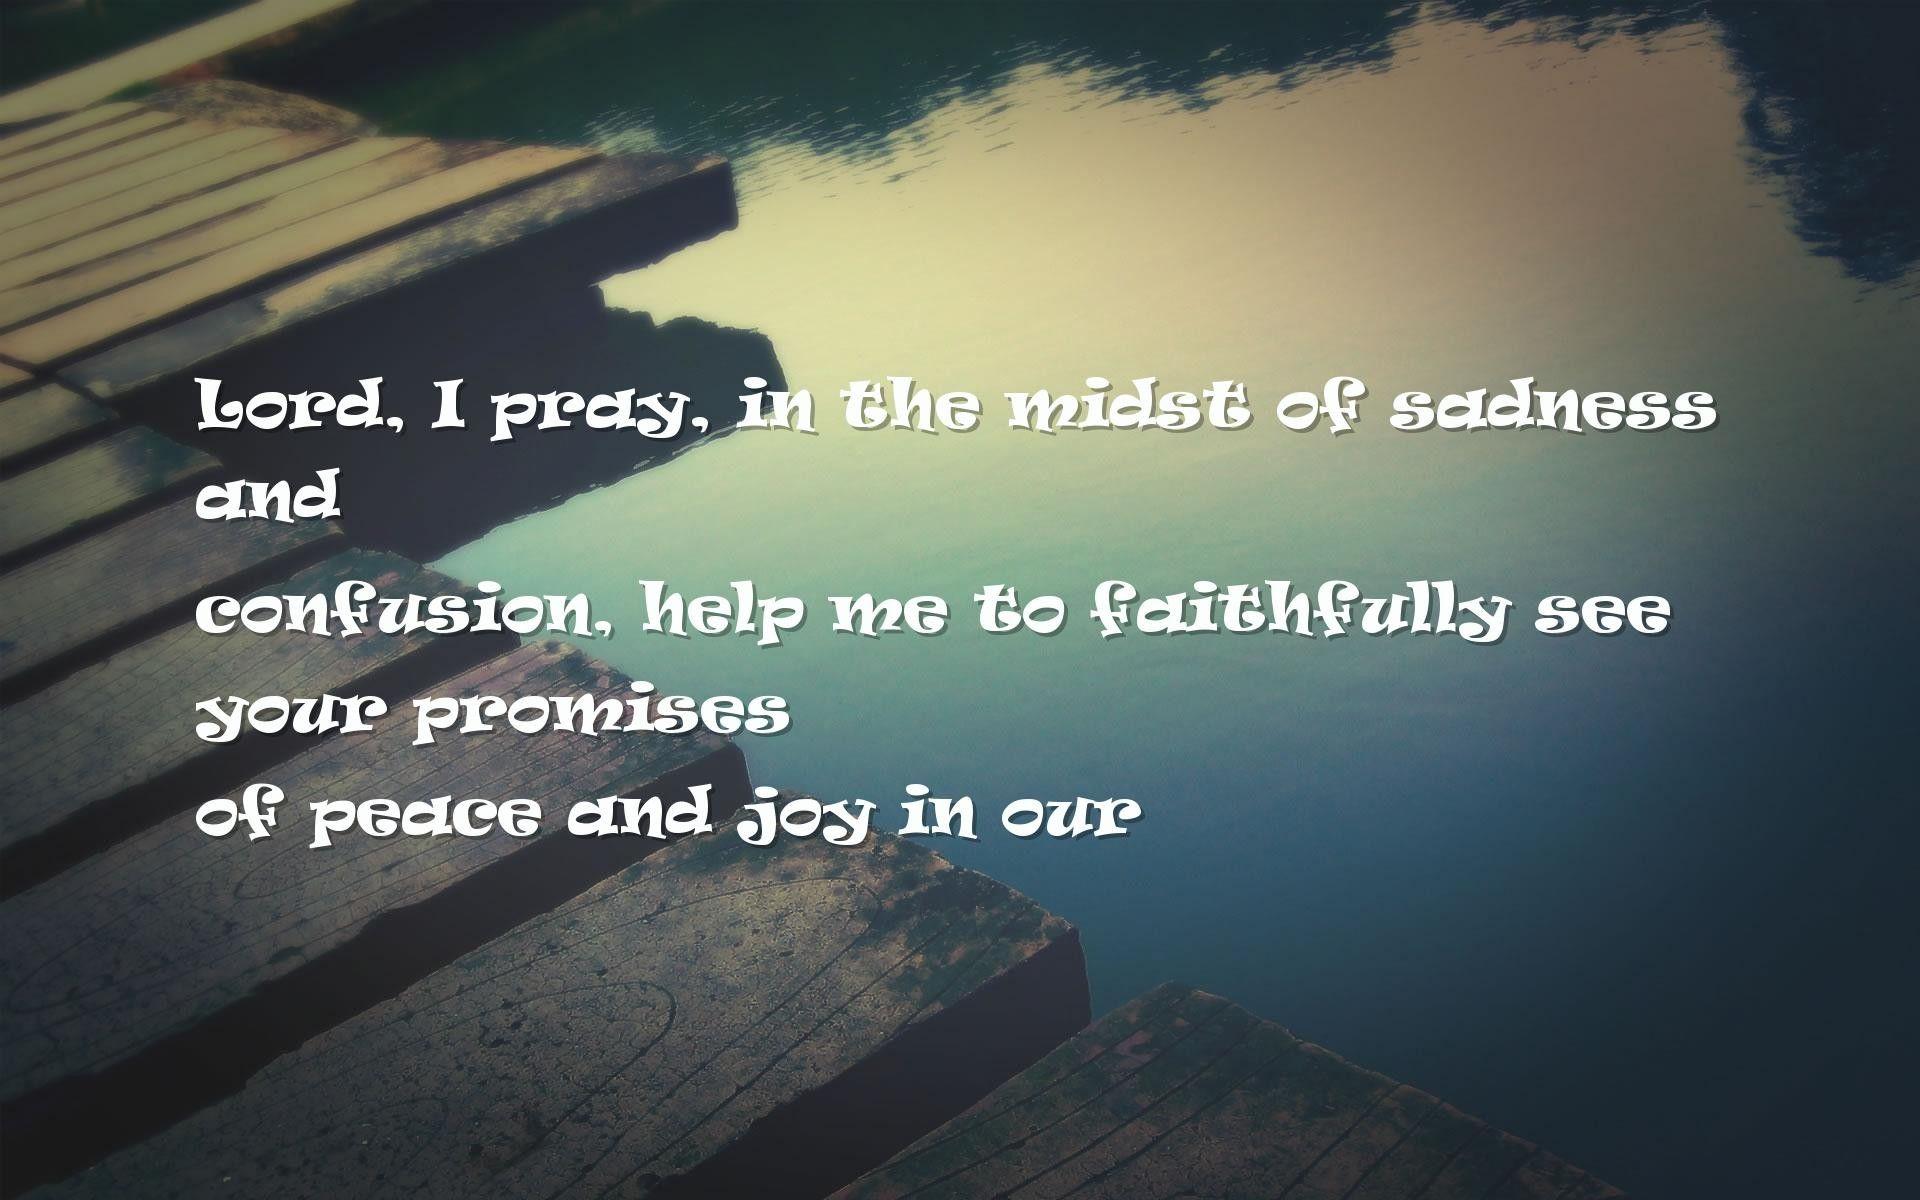 confusion, help Quotes Wallpaper, I pray, in the midst